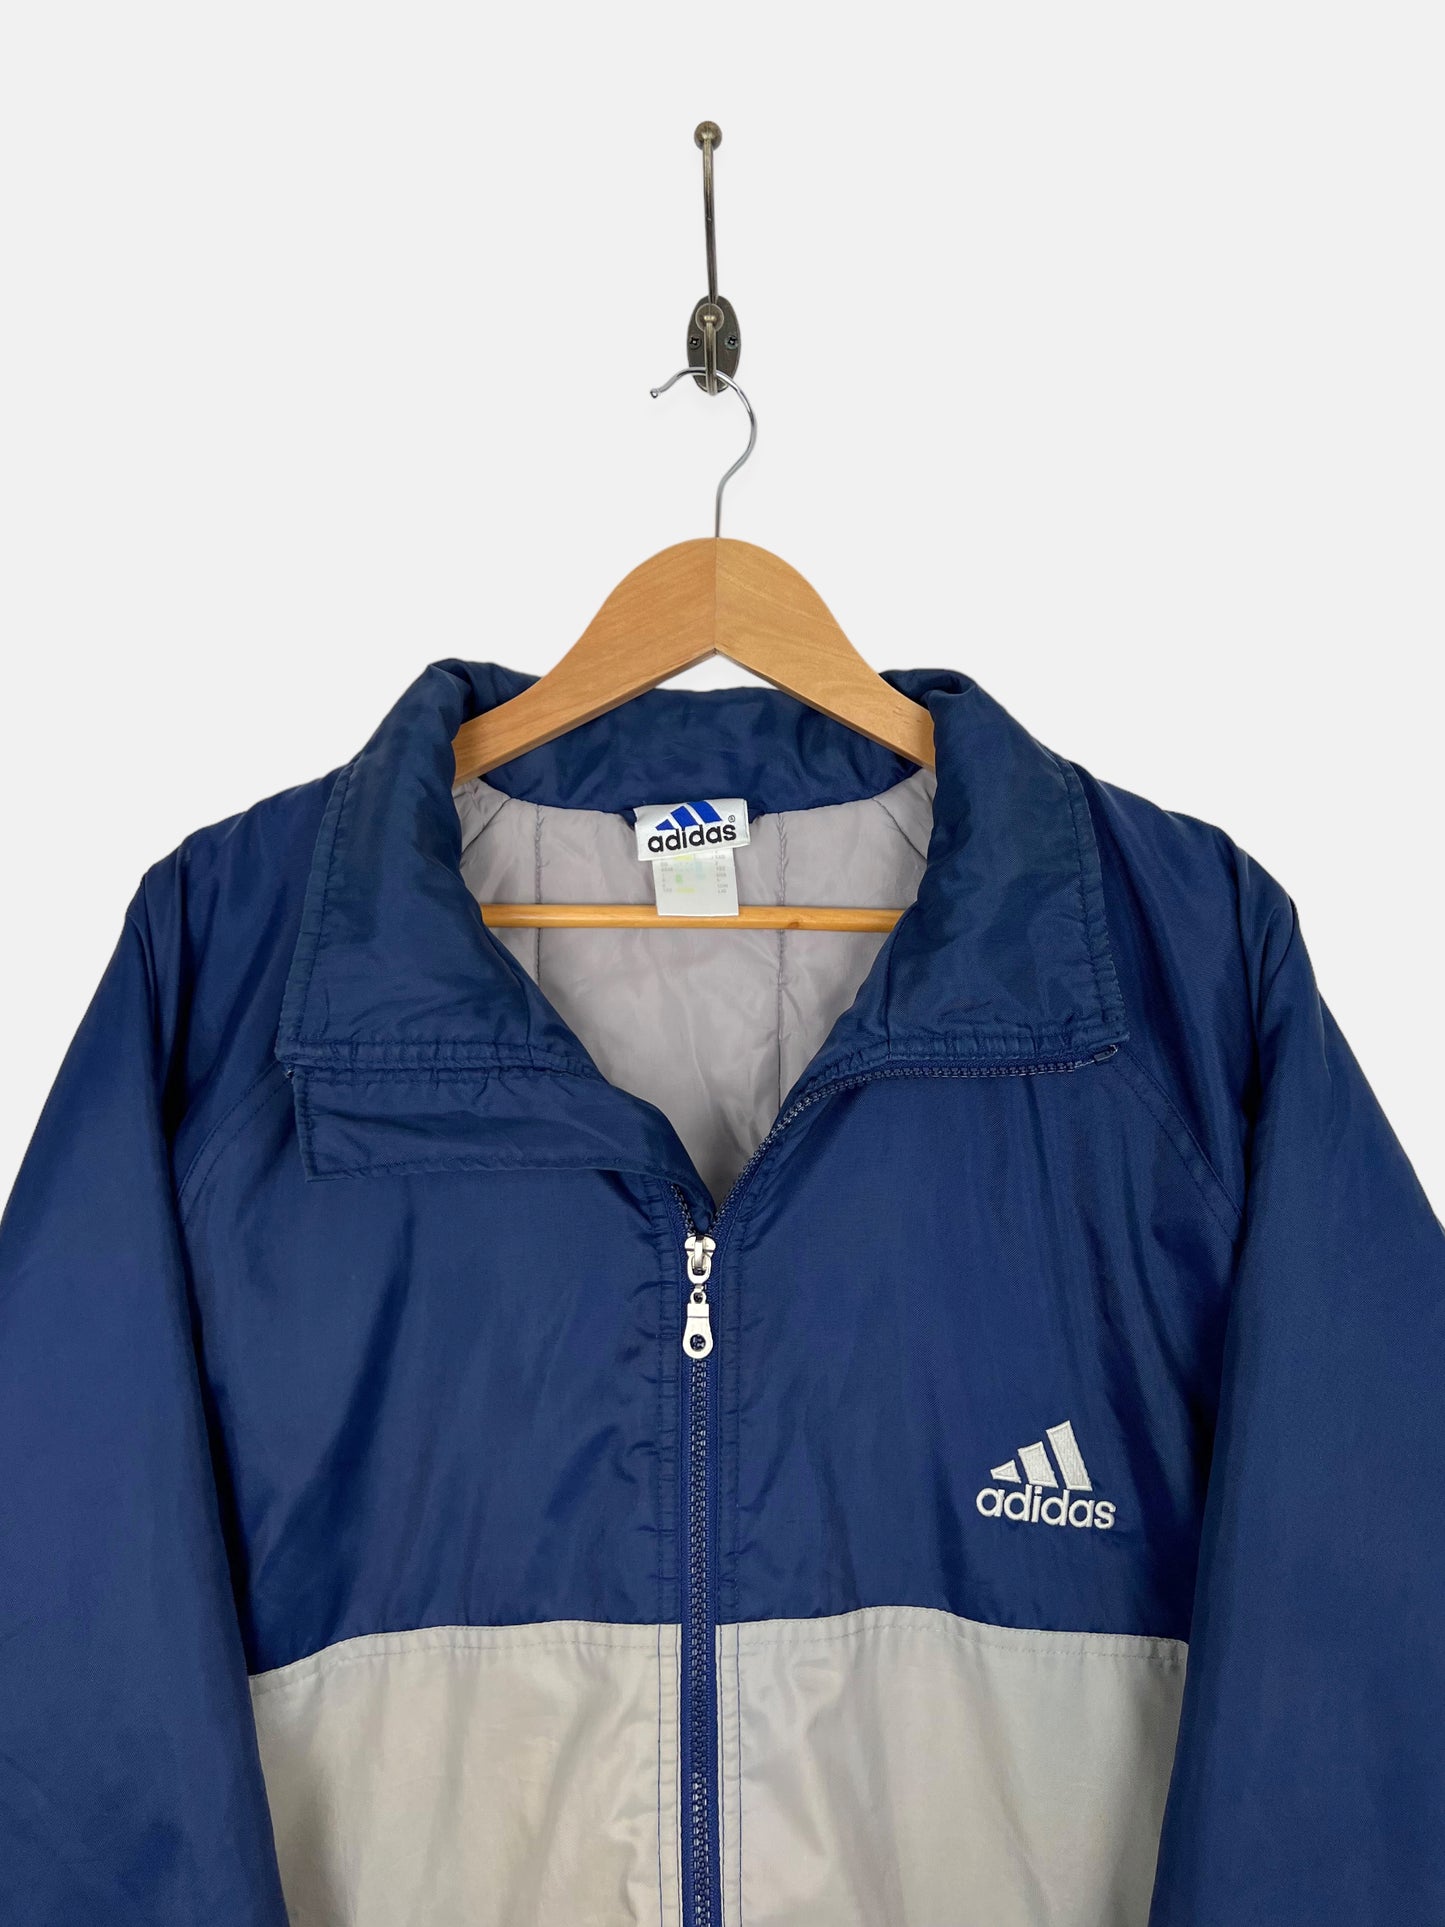 90's Adidas Embroidered Vintage Thick Jacket with Hood Size 2XL